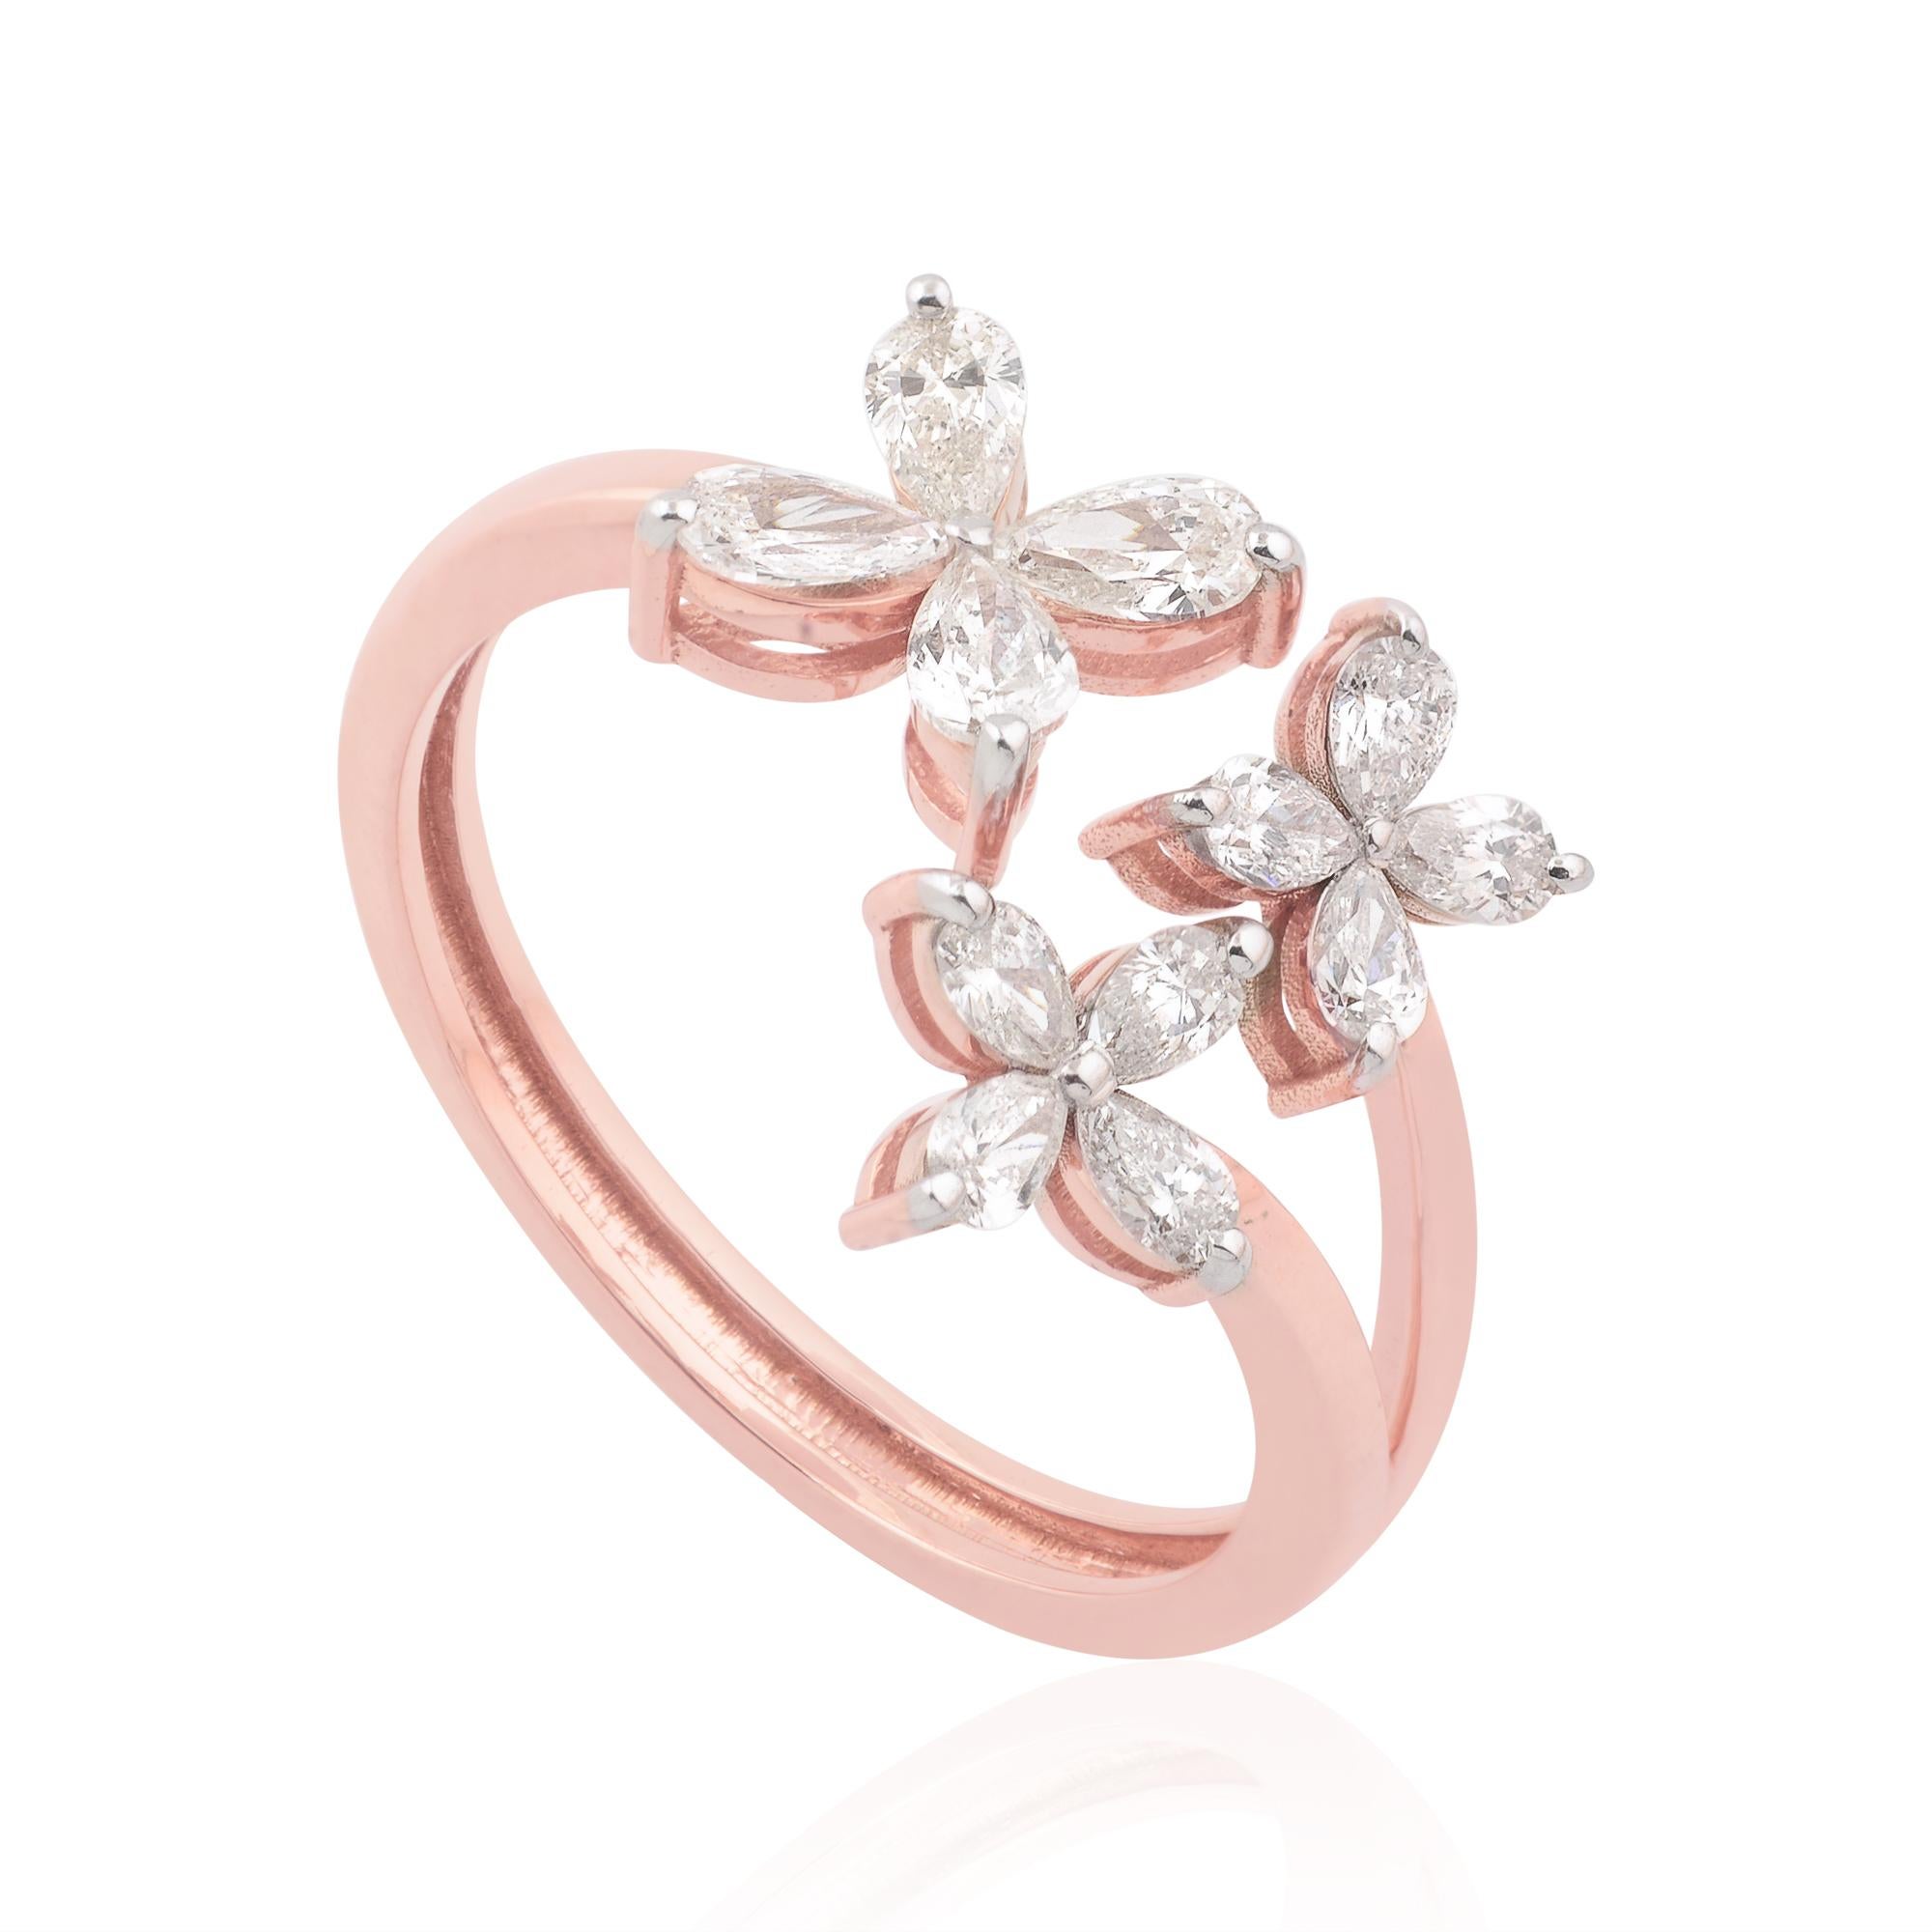 For Sale:  0.68 Carat SI Clarity HI Color Pear Diamond Flower Ring 18k Rose Gold Jewelry 3